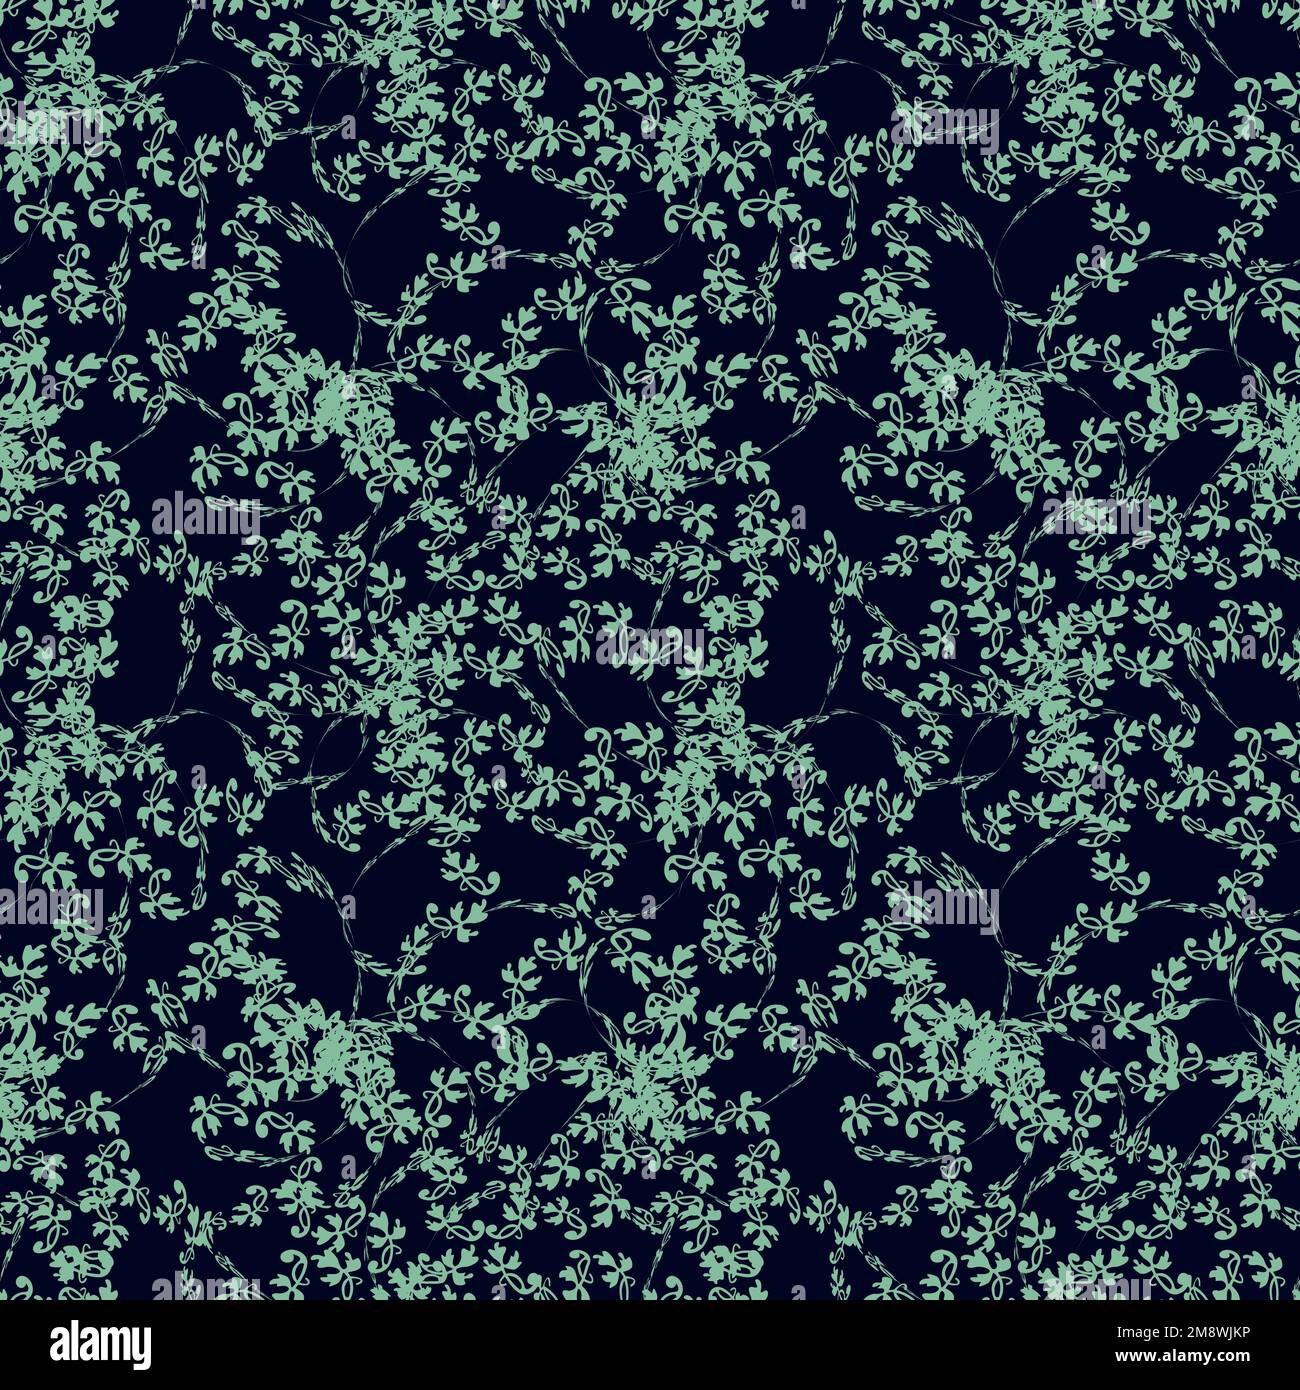 Seamless simple cute pattern of green curled design elements like plants on navy background.Endless ornament.Colourful backdrop for fabric,textile Stock Vector